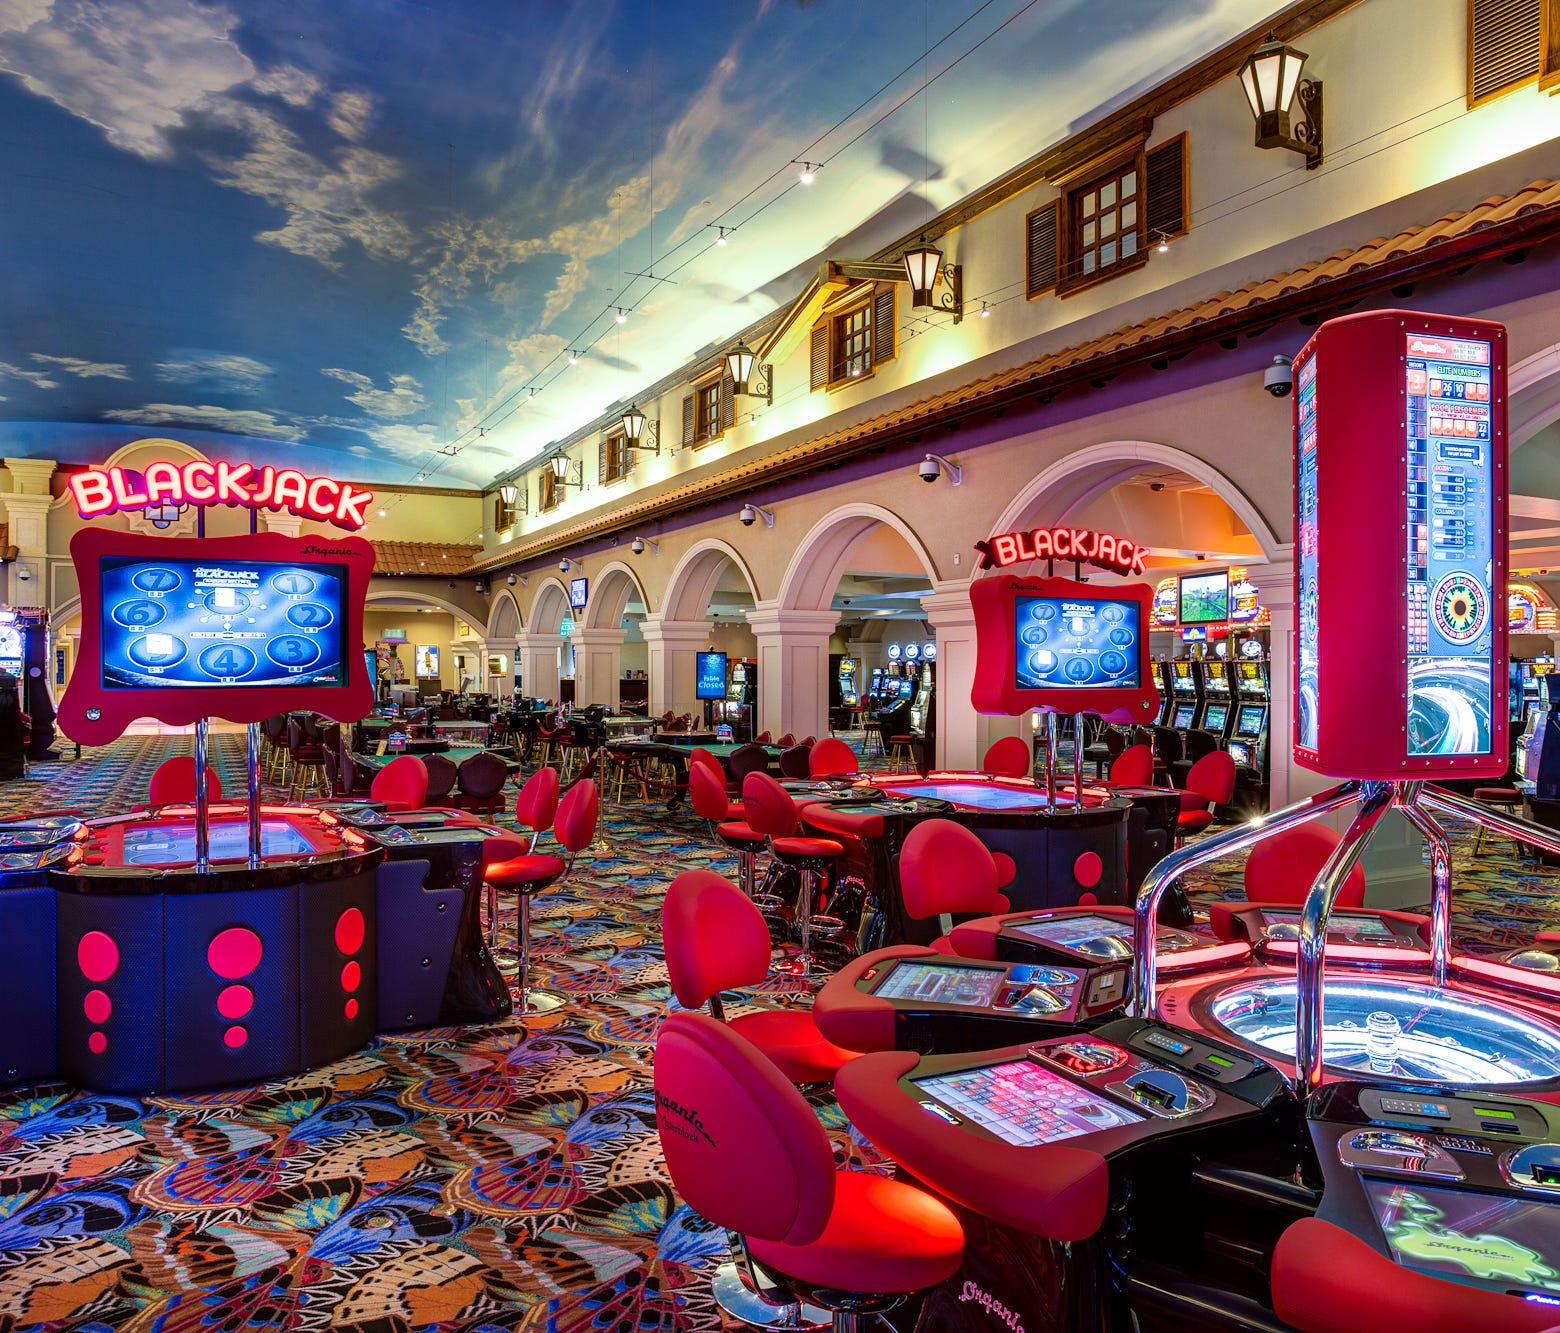 Open to guests and non-guests, the Royal Beach Casino has 300 slot games, 20 table games and 13 screens for keeping score of big league sports.